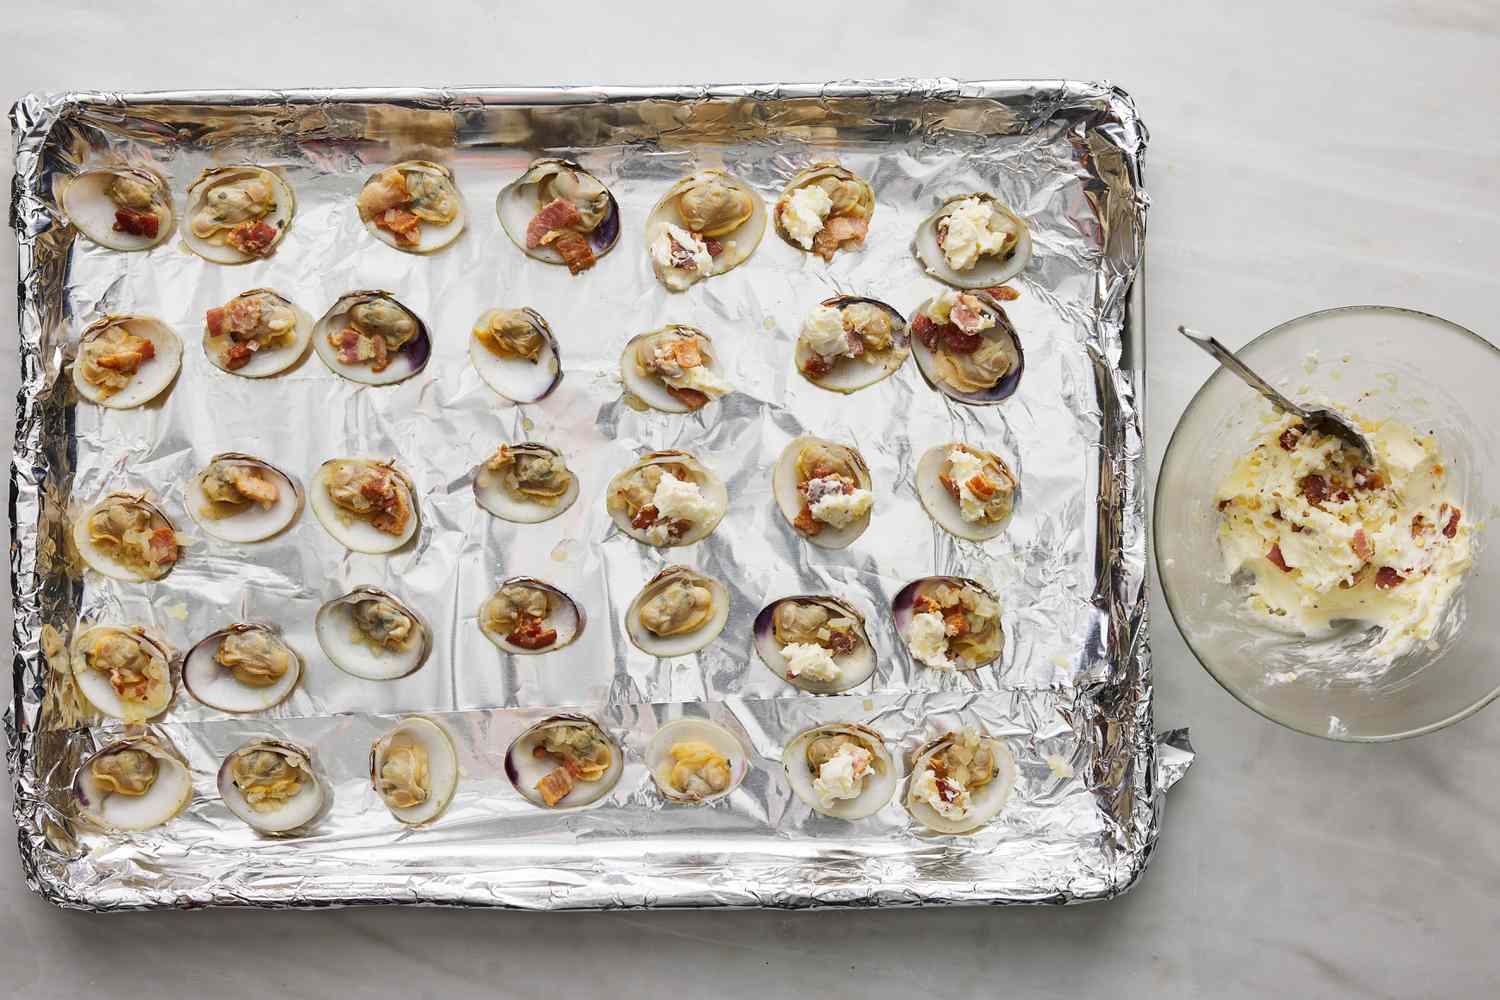 prepared clams on foil lined baking sheet with dollops of the compound butter